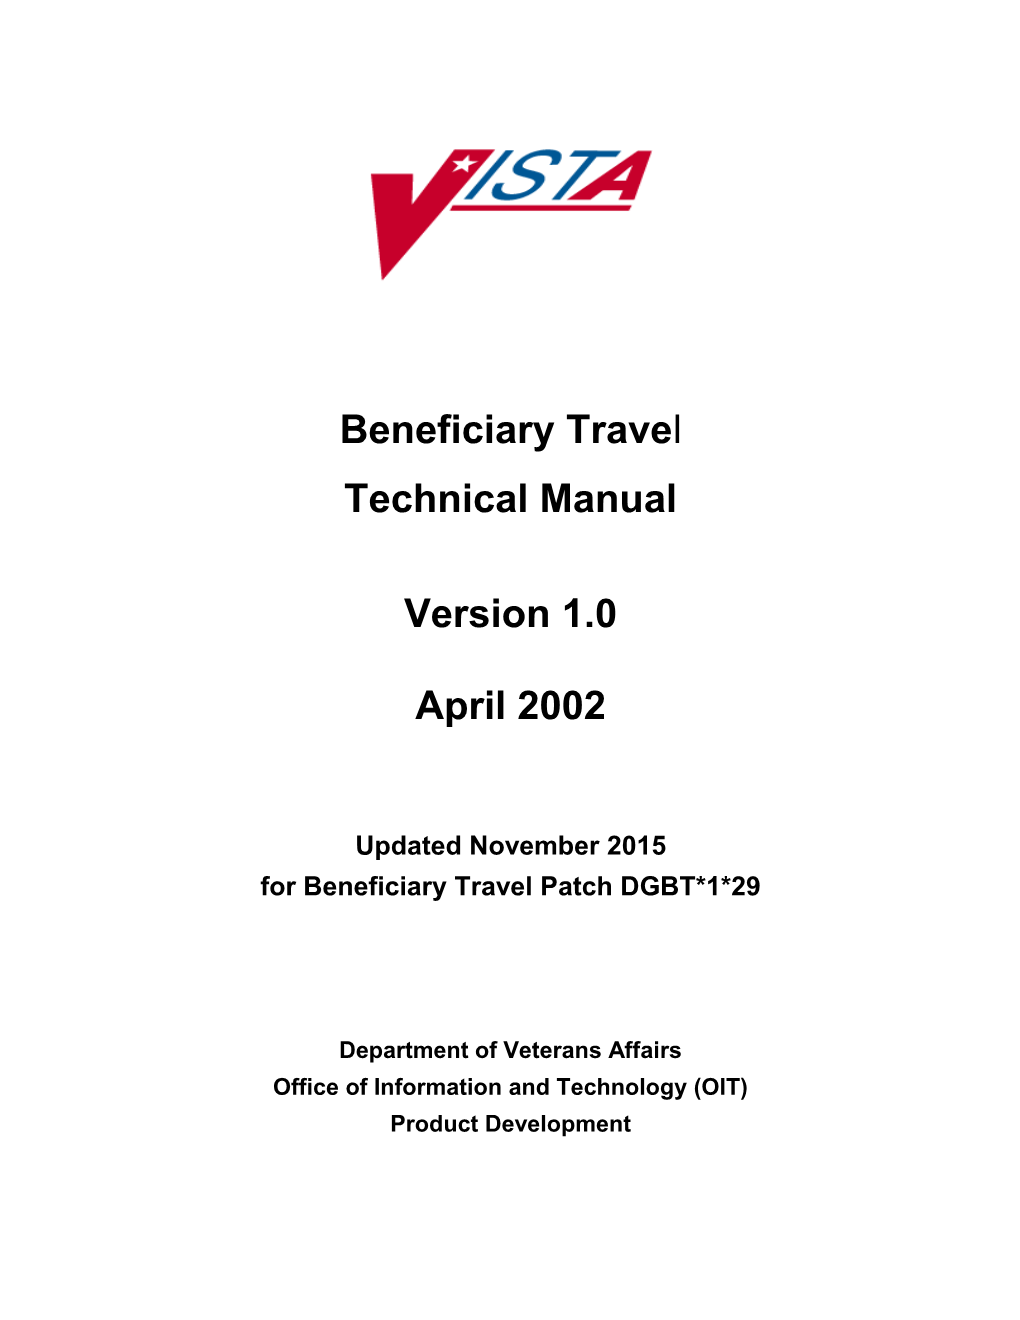 For Beneficiary Travel Patch DGBT*1*29